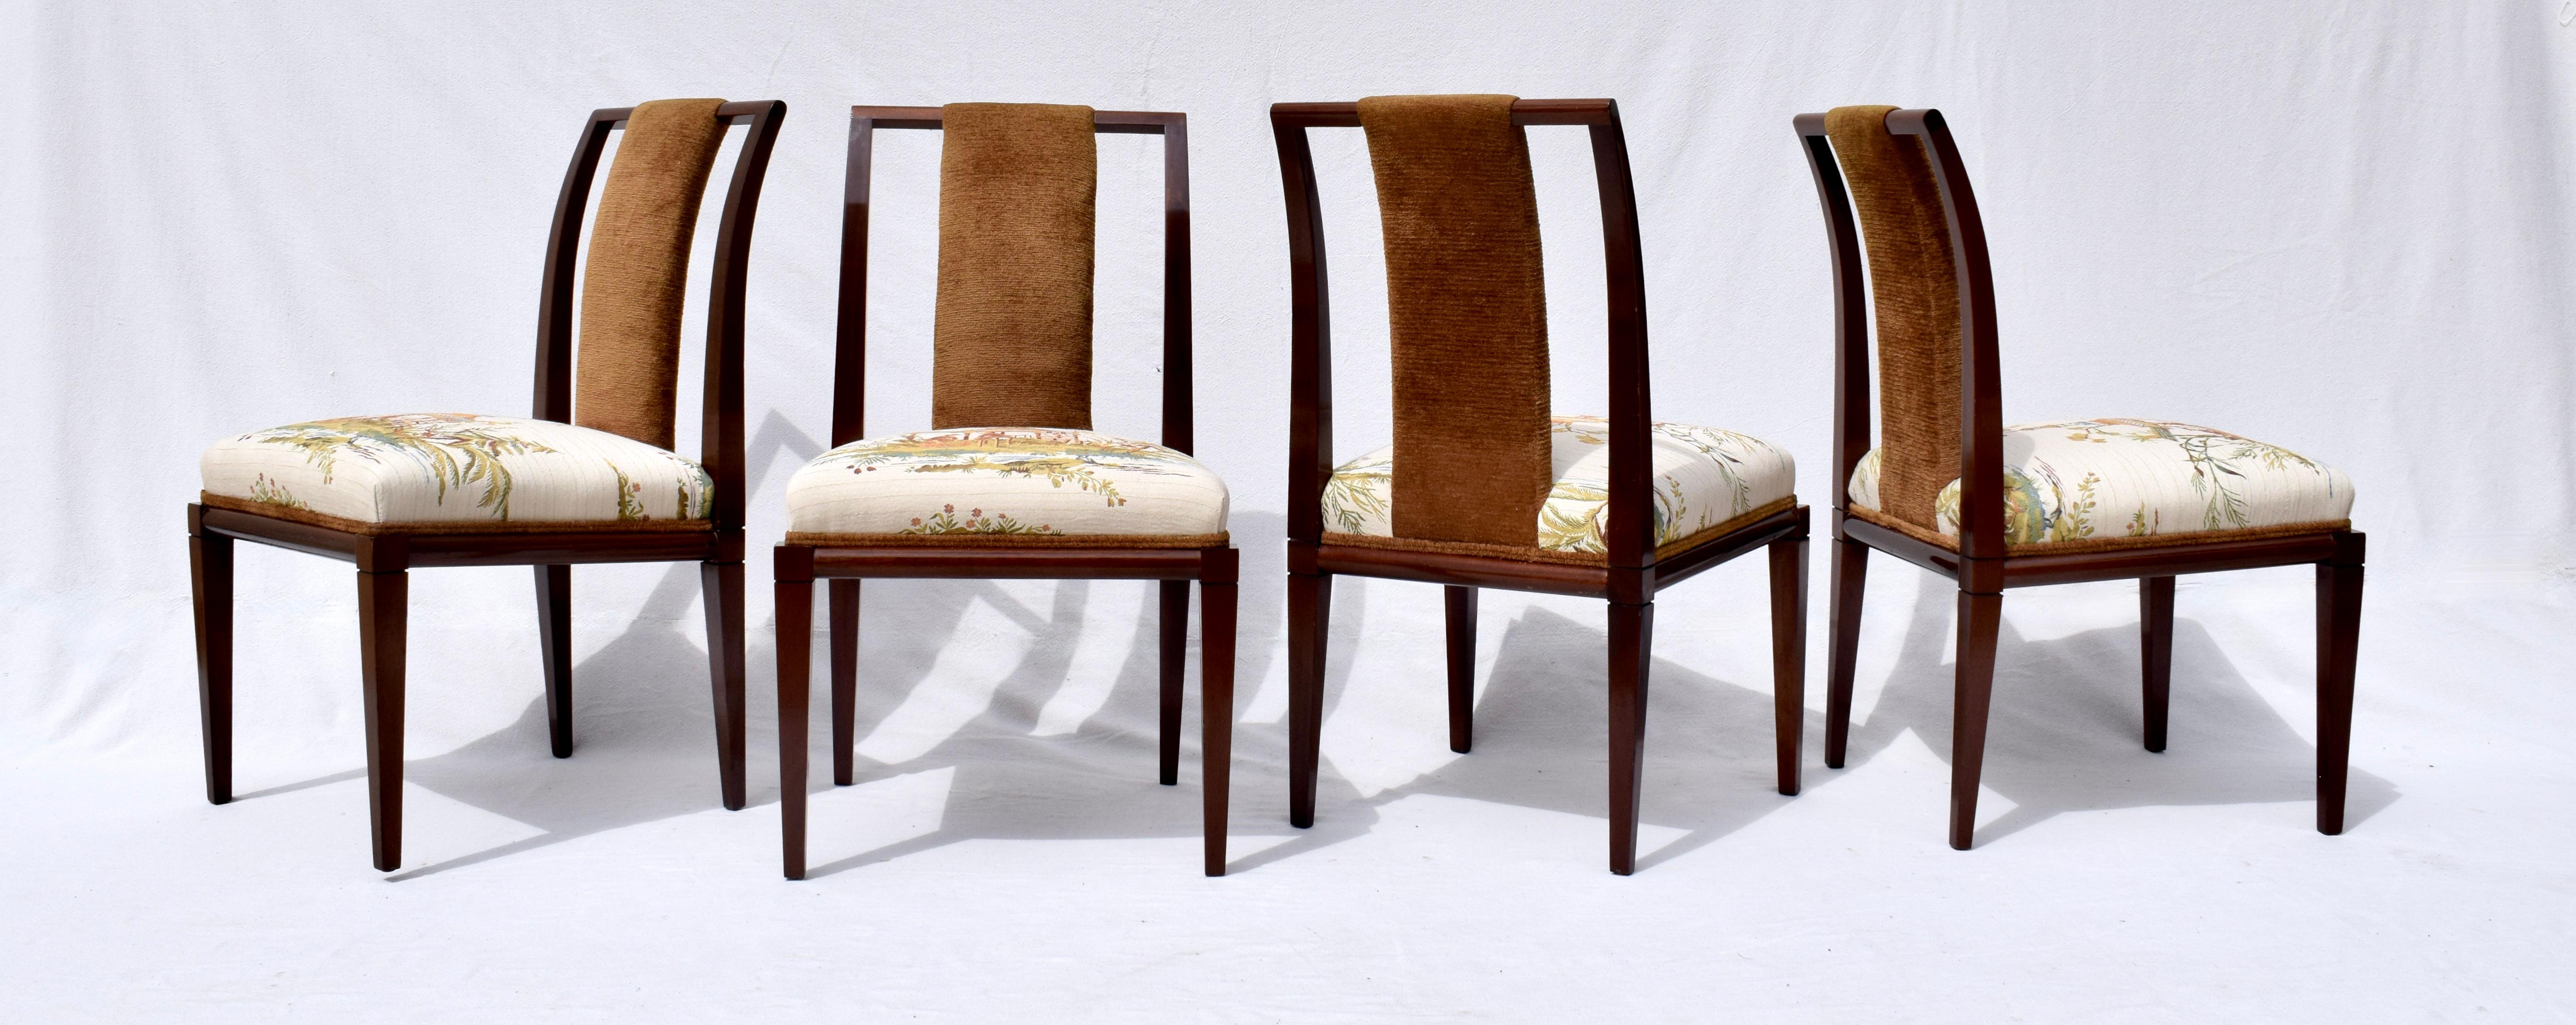 1950's Tommi Parzinger Dining Chairs in Brunschwig & Fils In Good Condition For Sale In Southampton, NJ